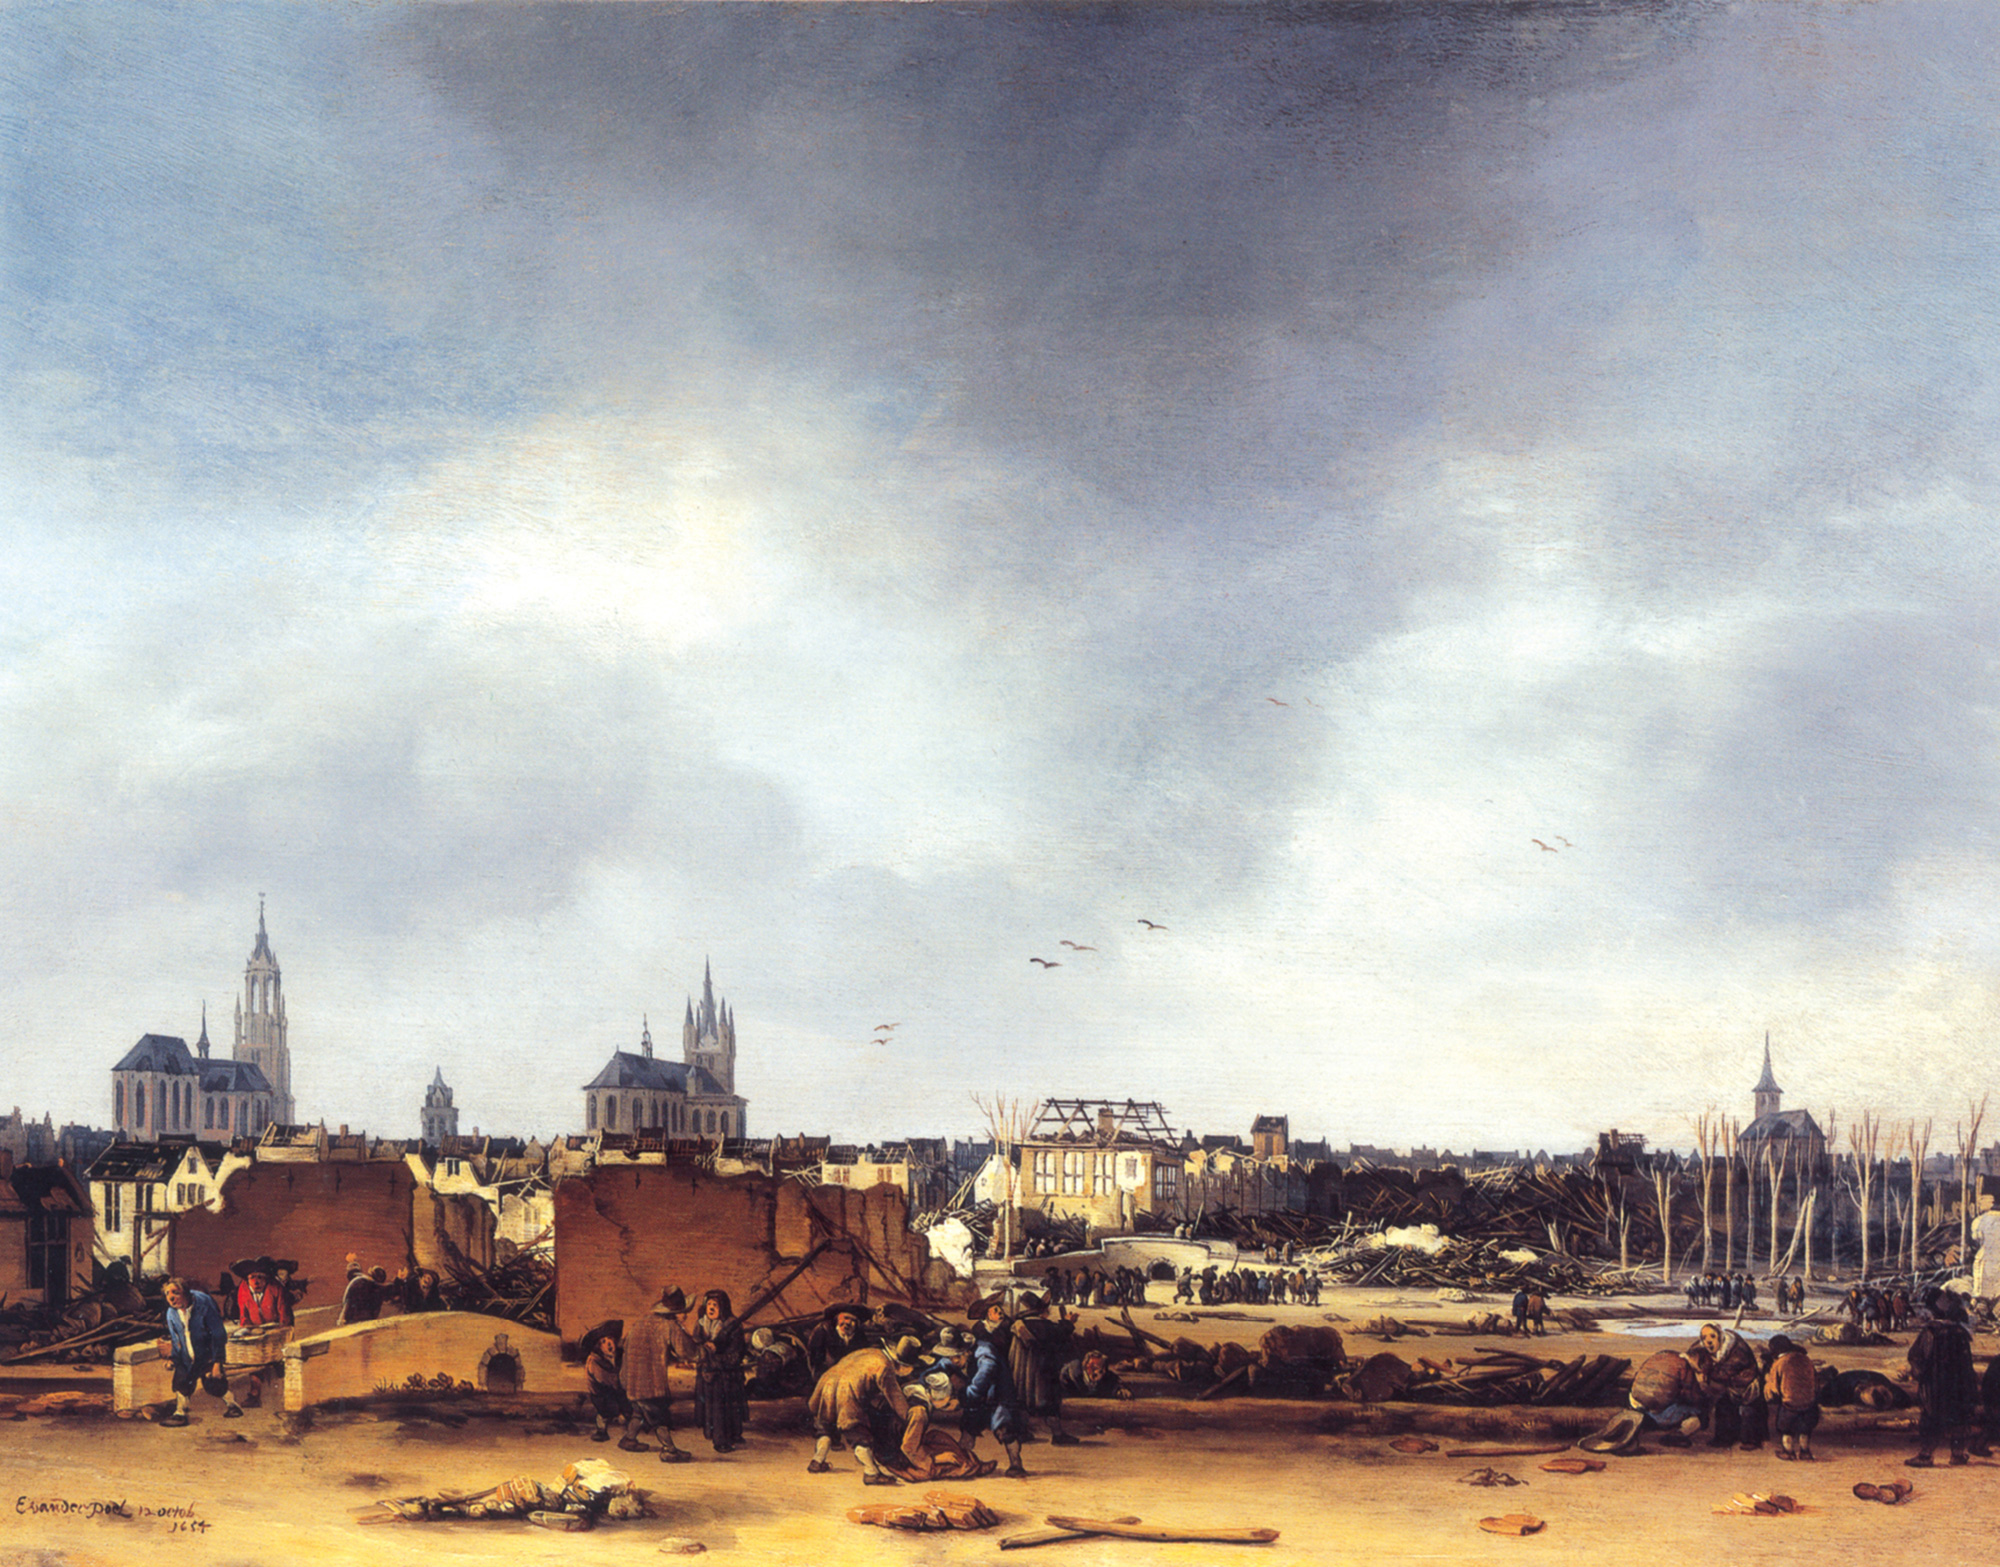 Egbert van der Poel sixteen fifty-four painting titled “A View of Delft after the Explosion of sixteen fifty-four.”